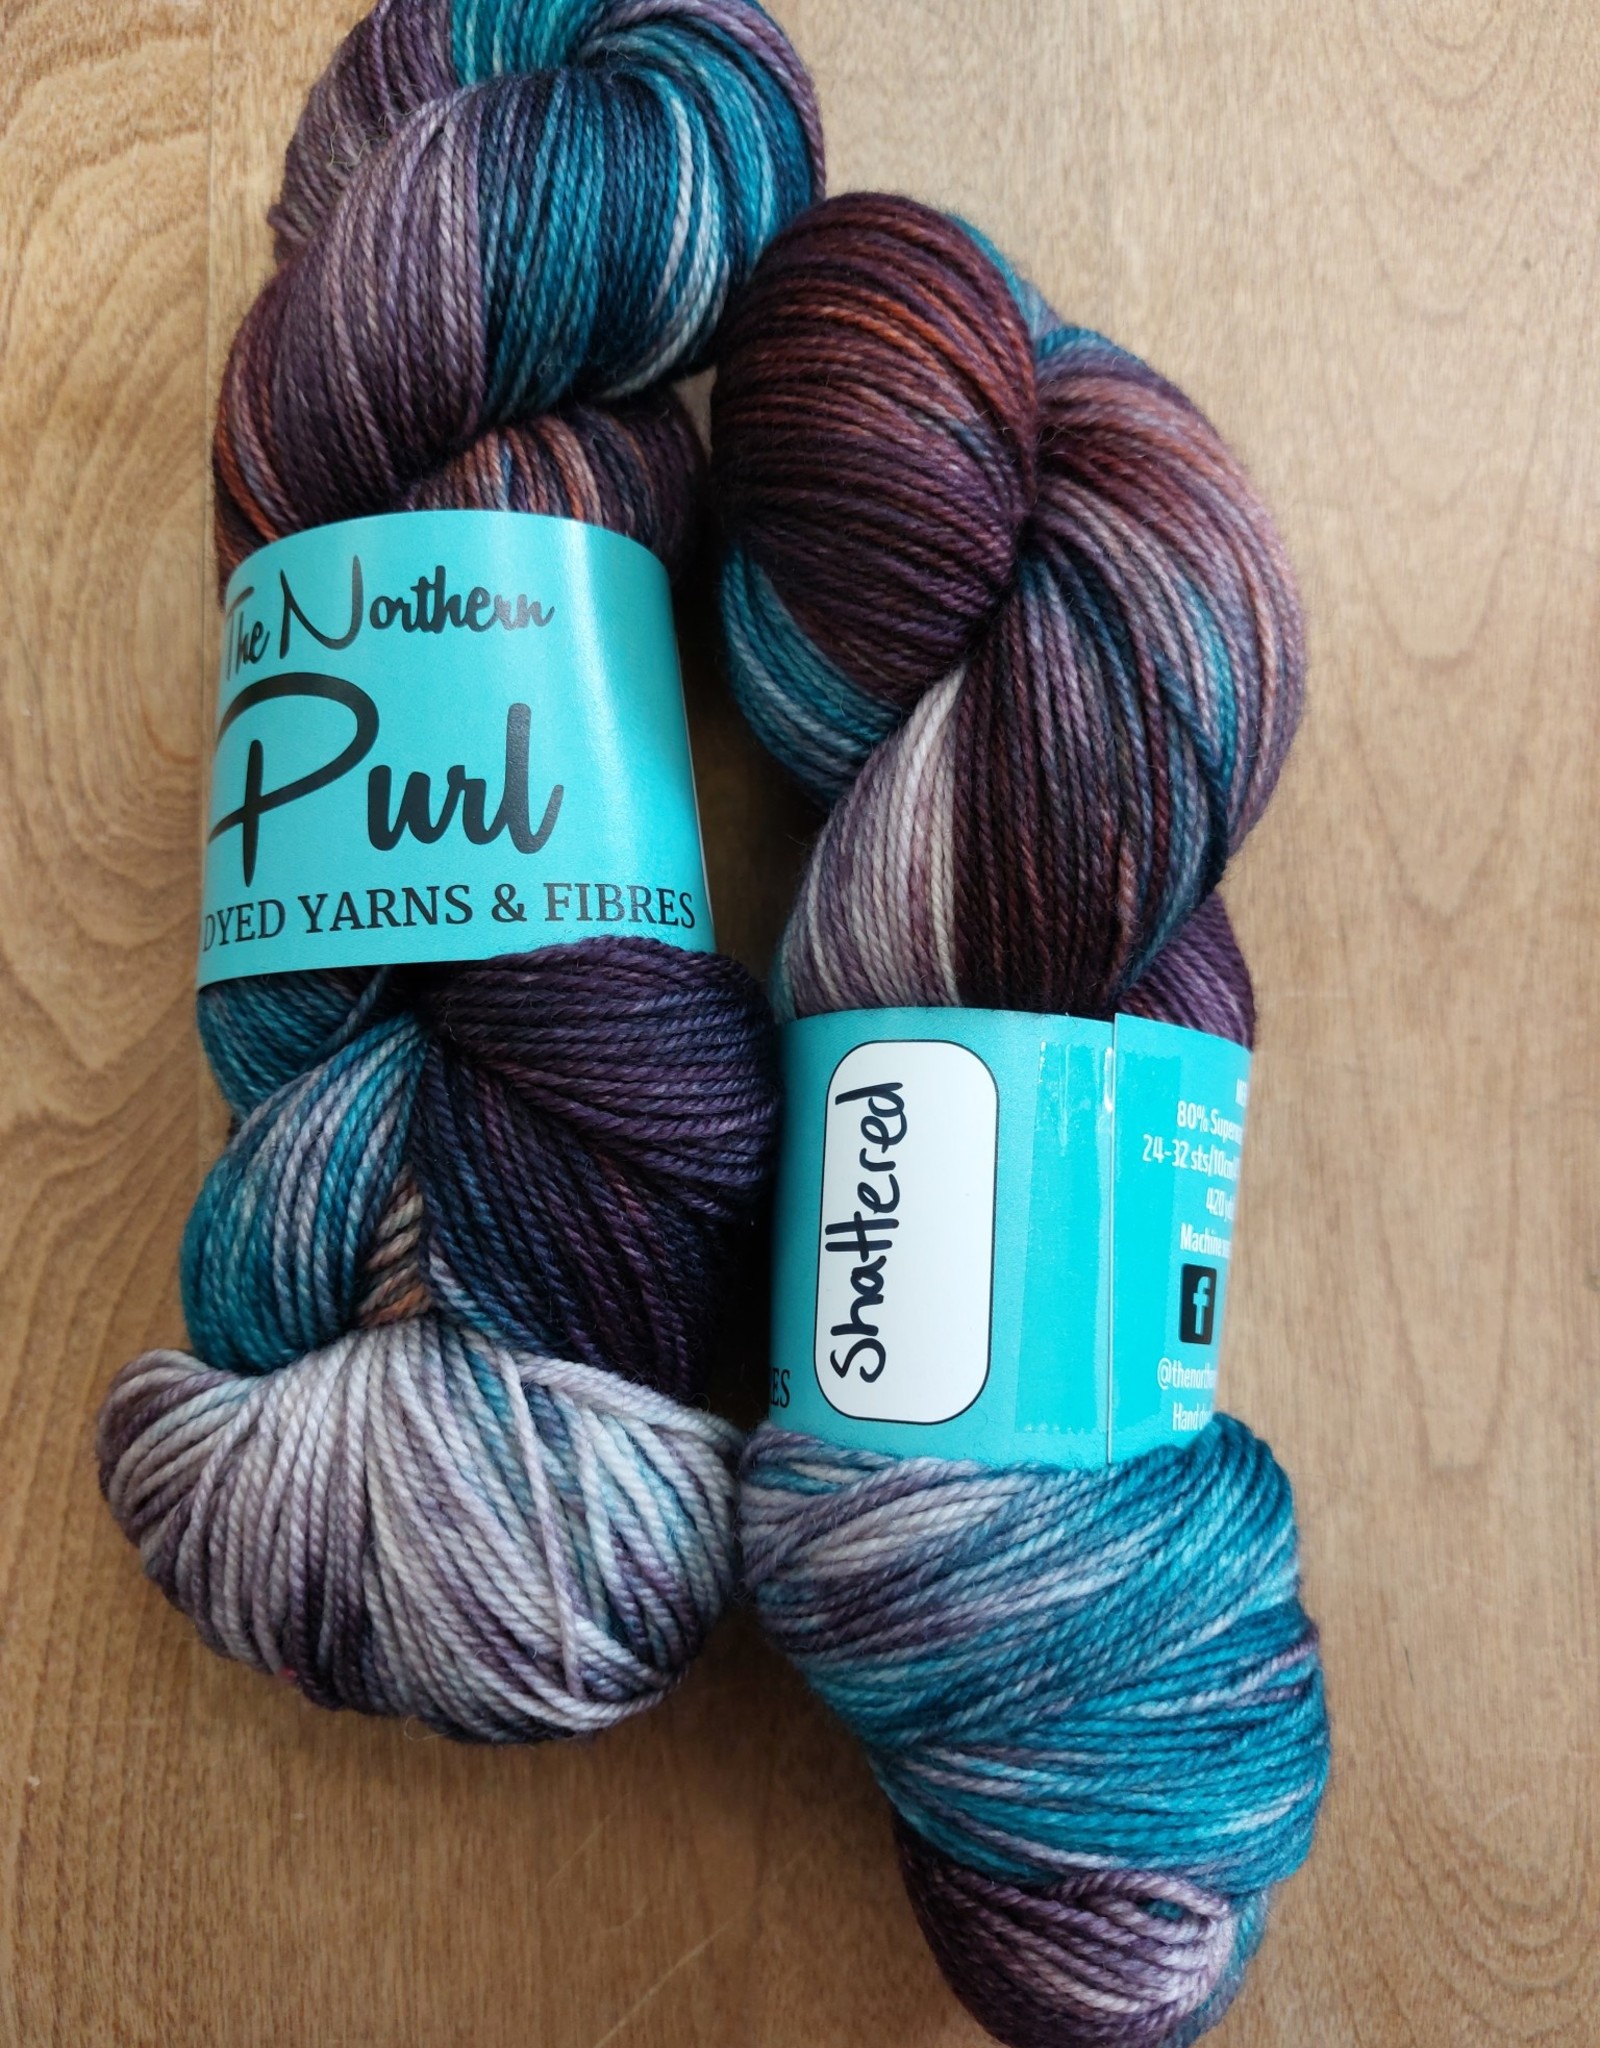 The Northern Purl